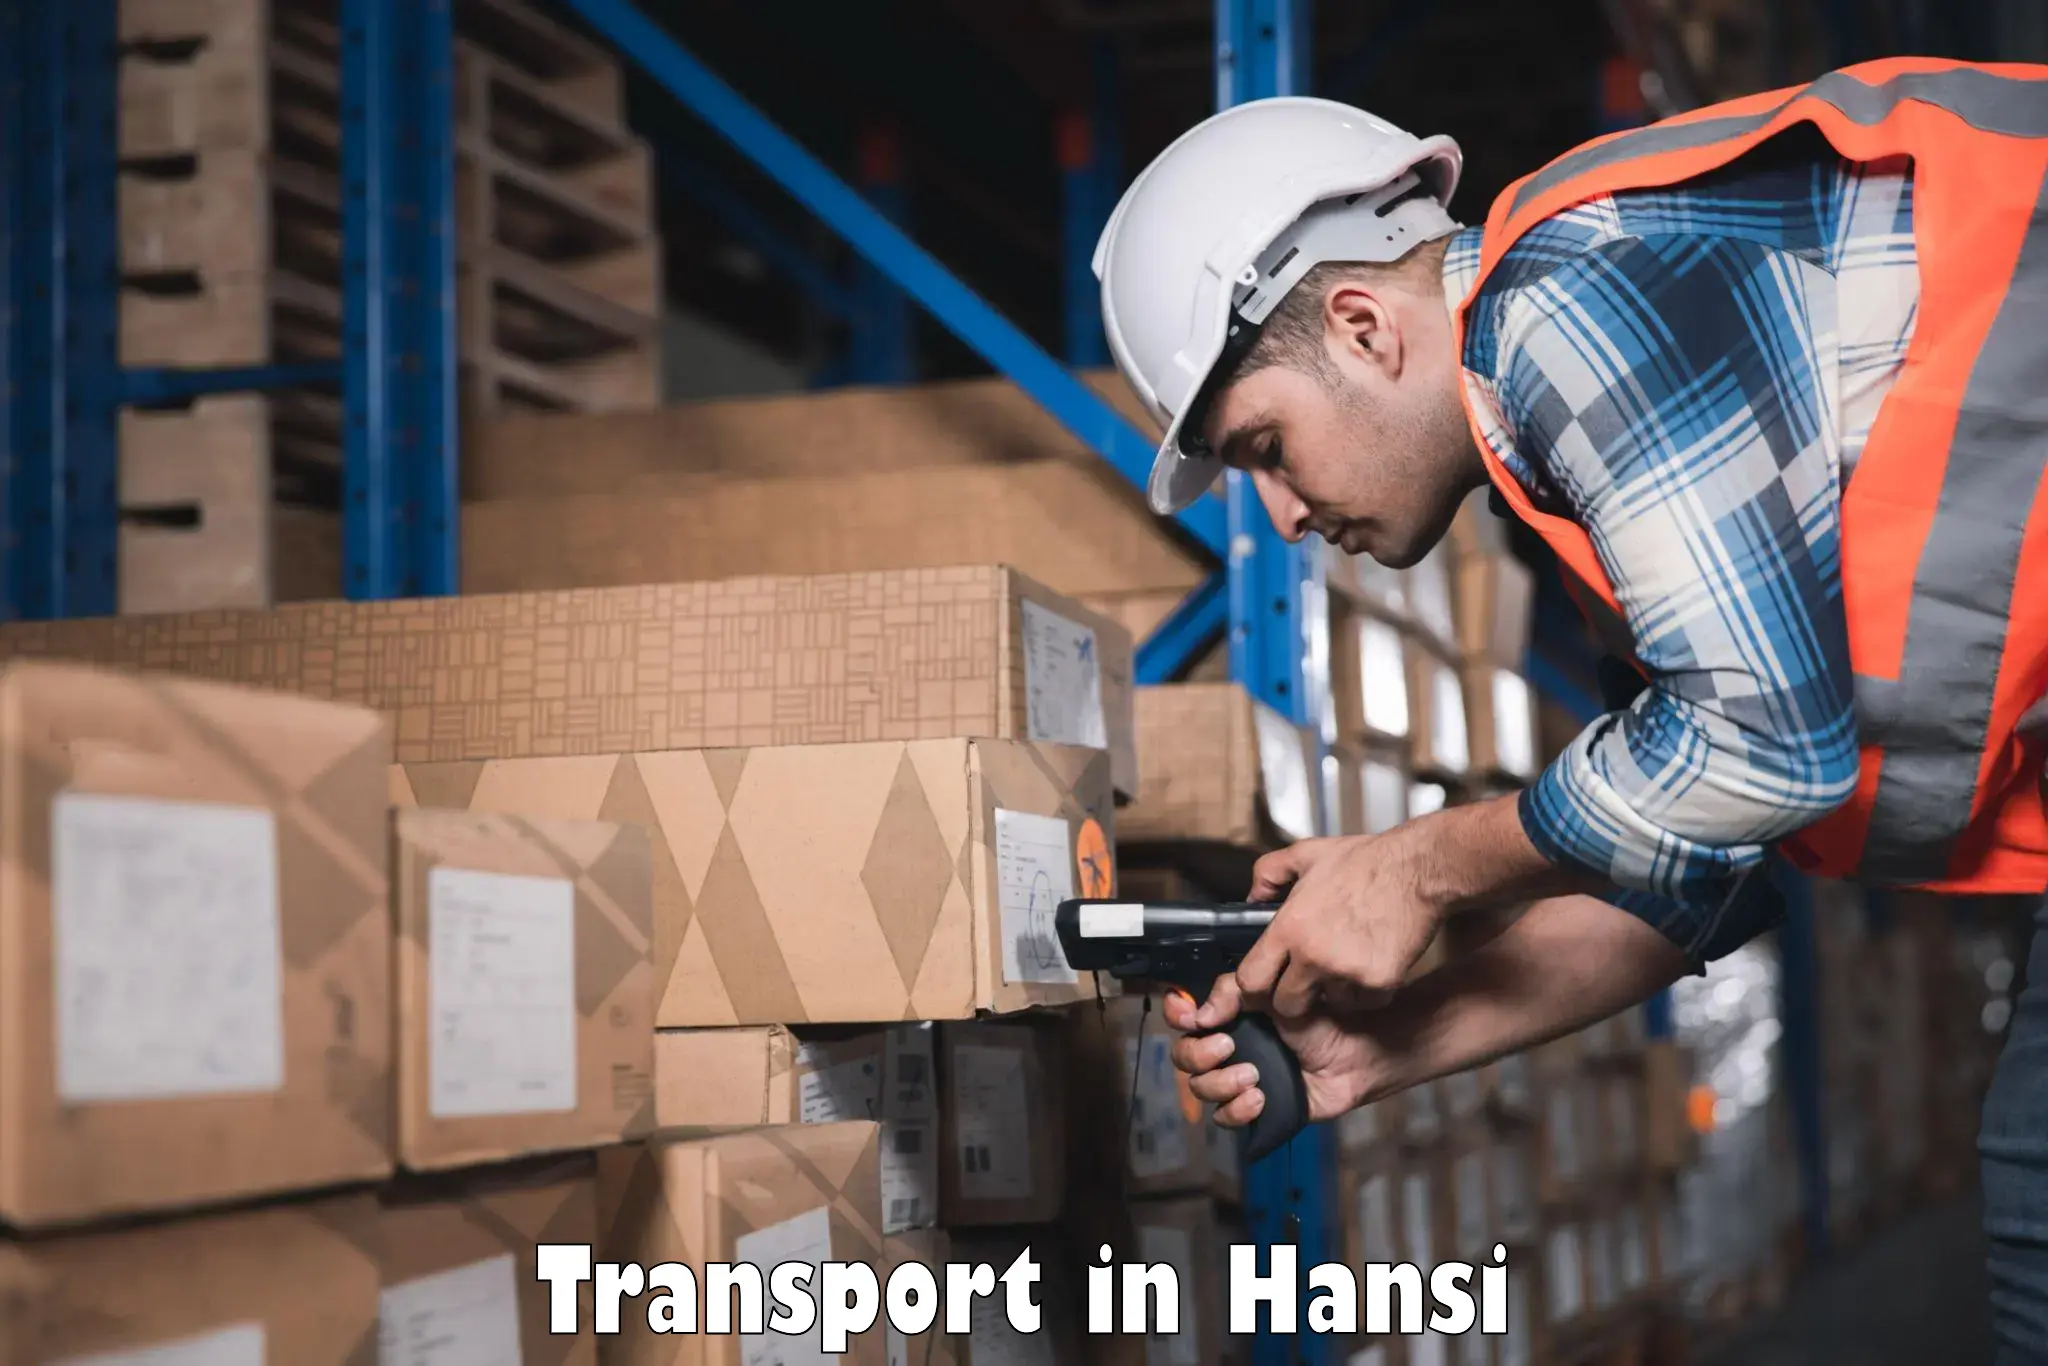 Vehicle transport services in Hansi